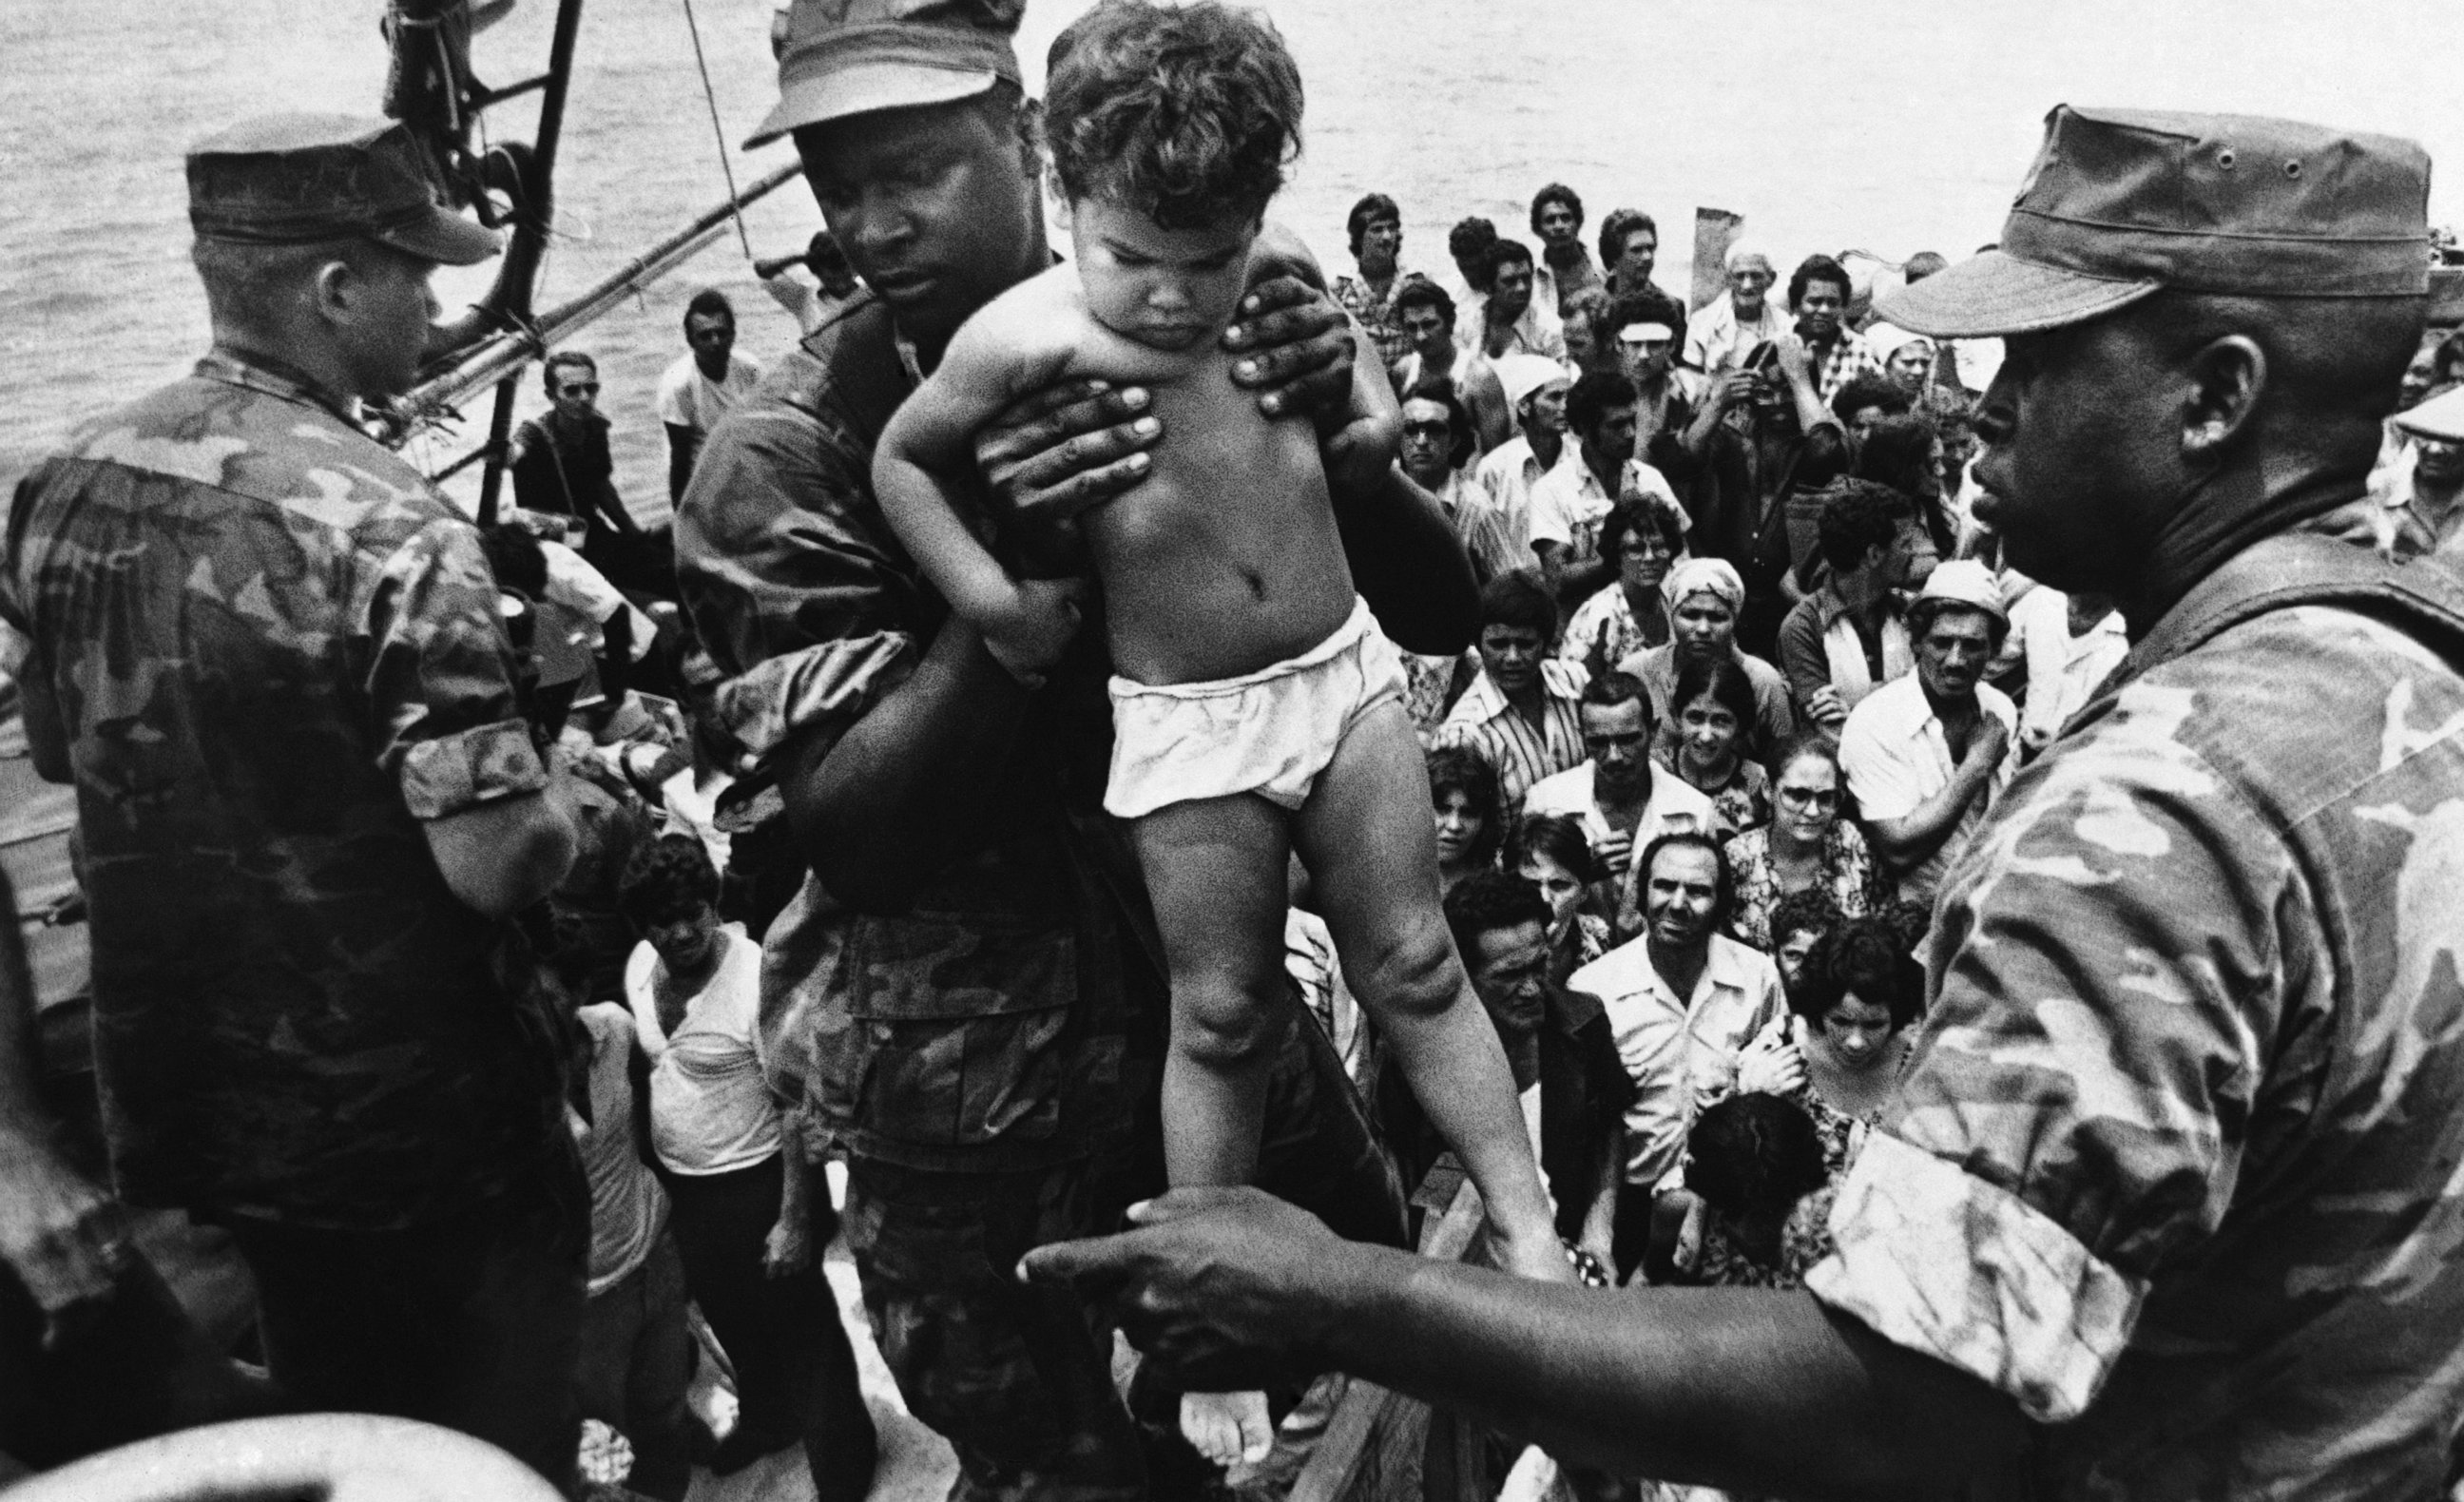 PHOTO: In 1980, Fidel Castro opened up the Mariel port in Cuba for residents to leave.  A U.S. Marine helped a young Cuban child off one of the refugee boats poured into Key West for weeks, May 10, 1980.  